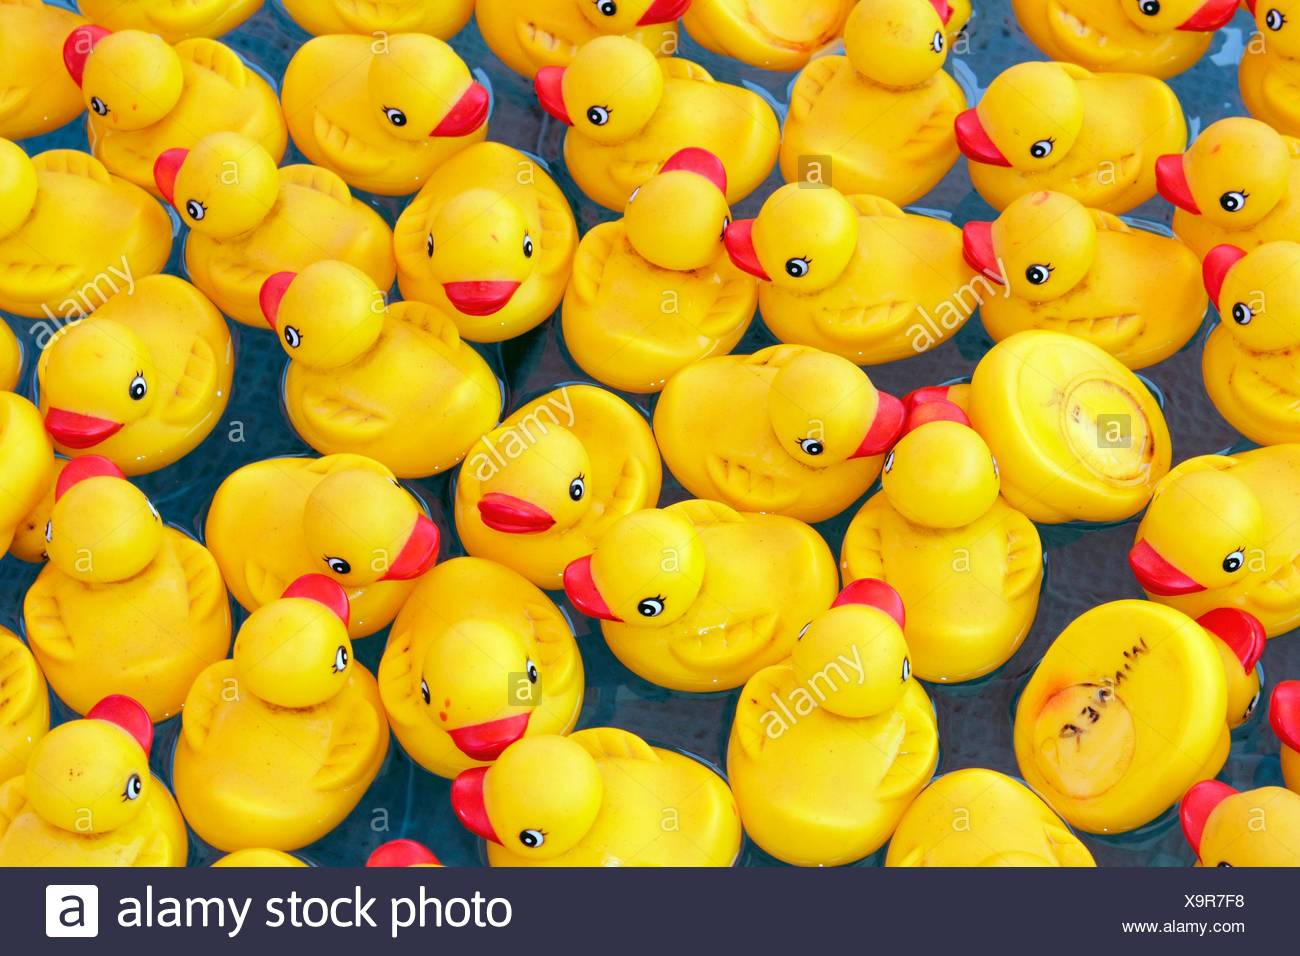 Download Yellow Rubber Duckys Floating On Water Stock Photo Alamy Yellowimages Mockups